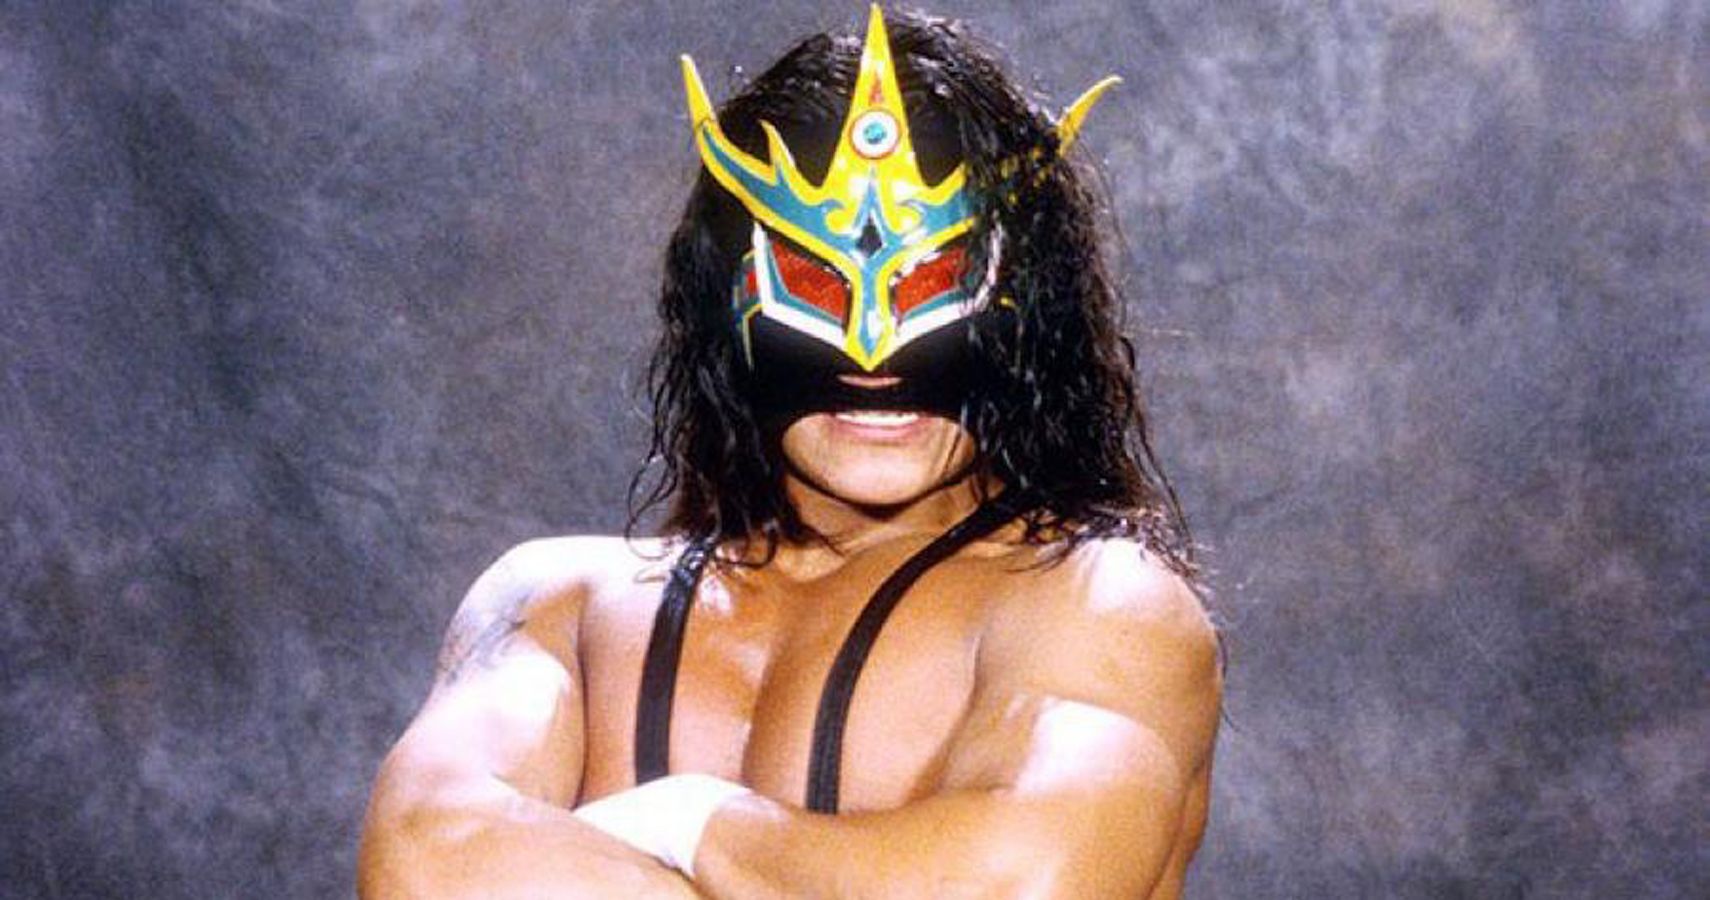 10 WCW Wrestlers Who Should’ve Been Huge (But Remained C-Listers)